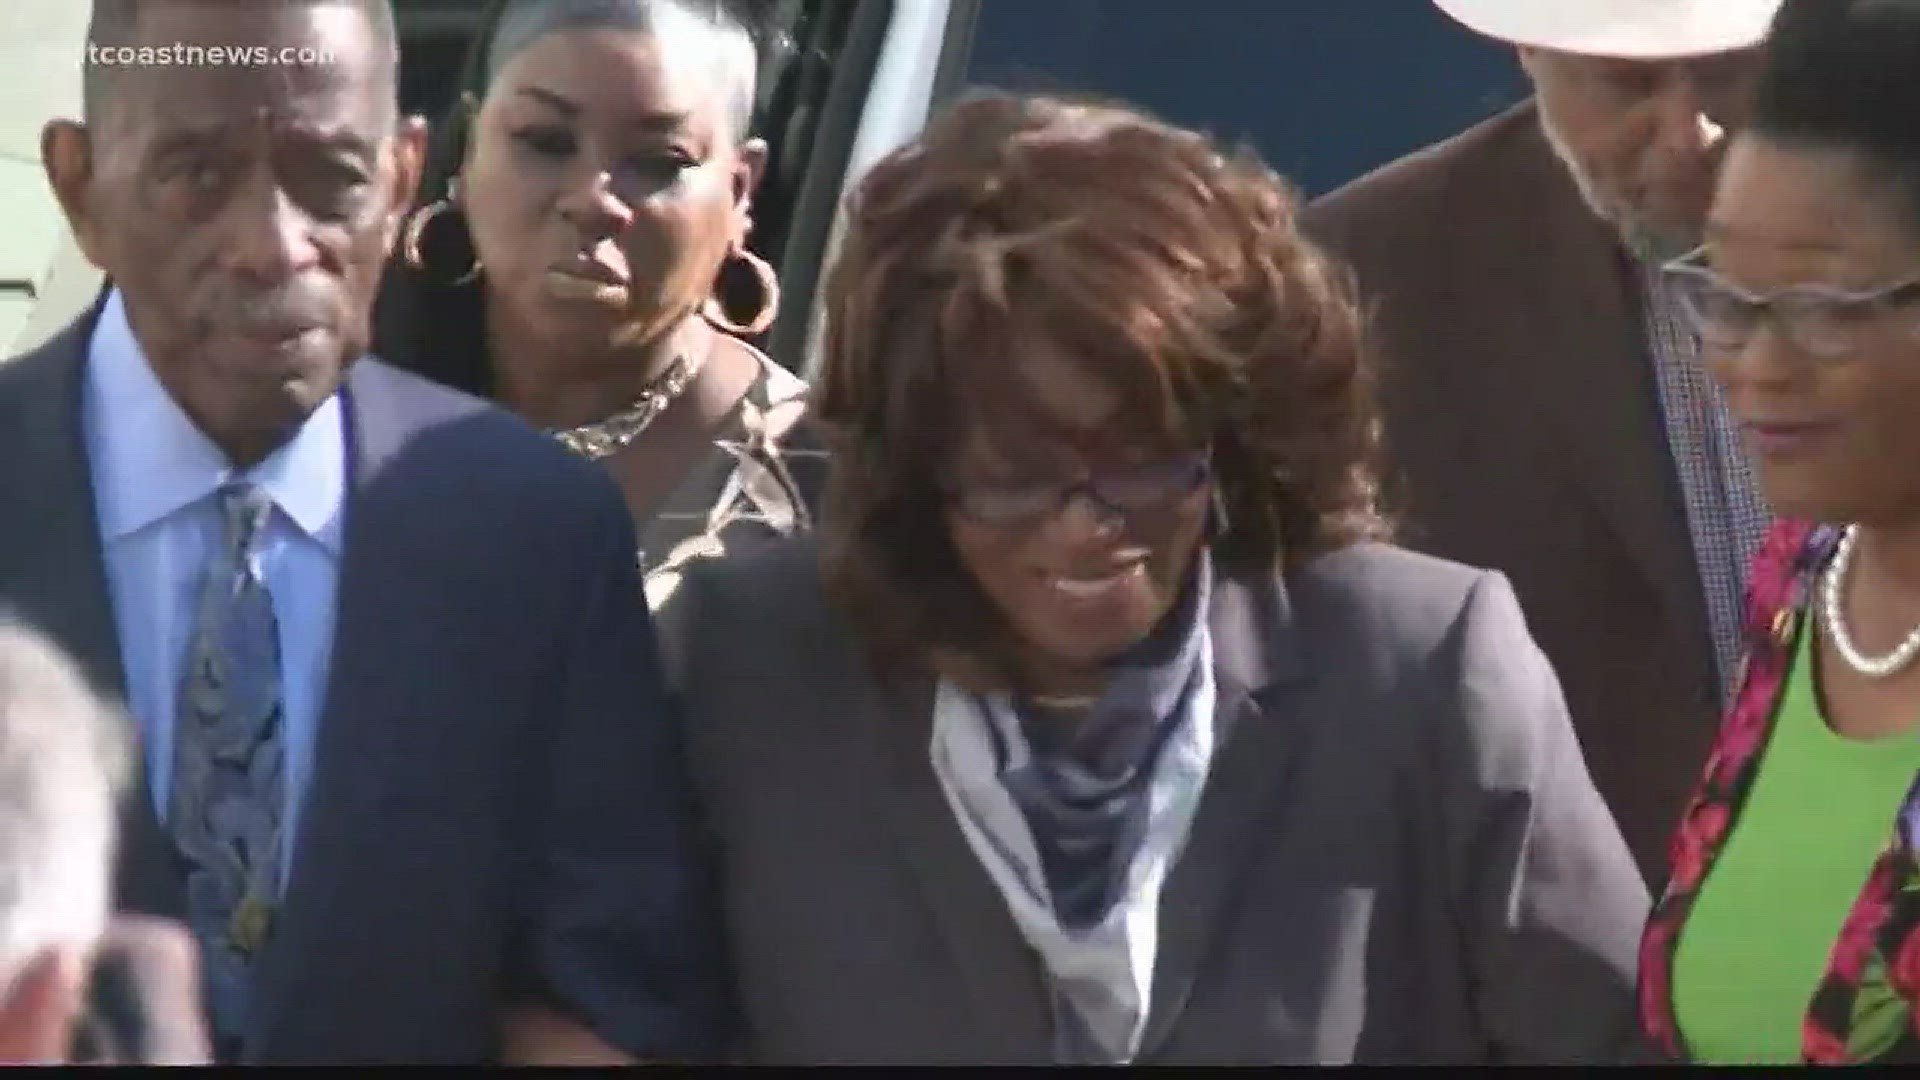 Corrine Brown is trying to prolong her time outside of prison before her scheduled date of Jan. 29, when she is supposed to report for prison.